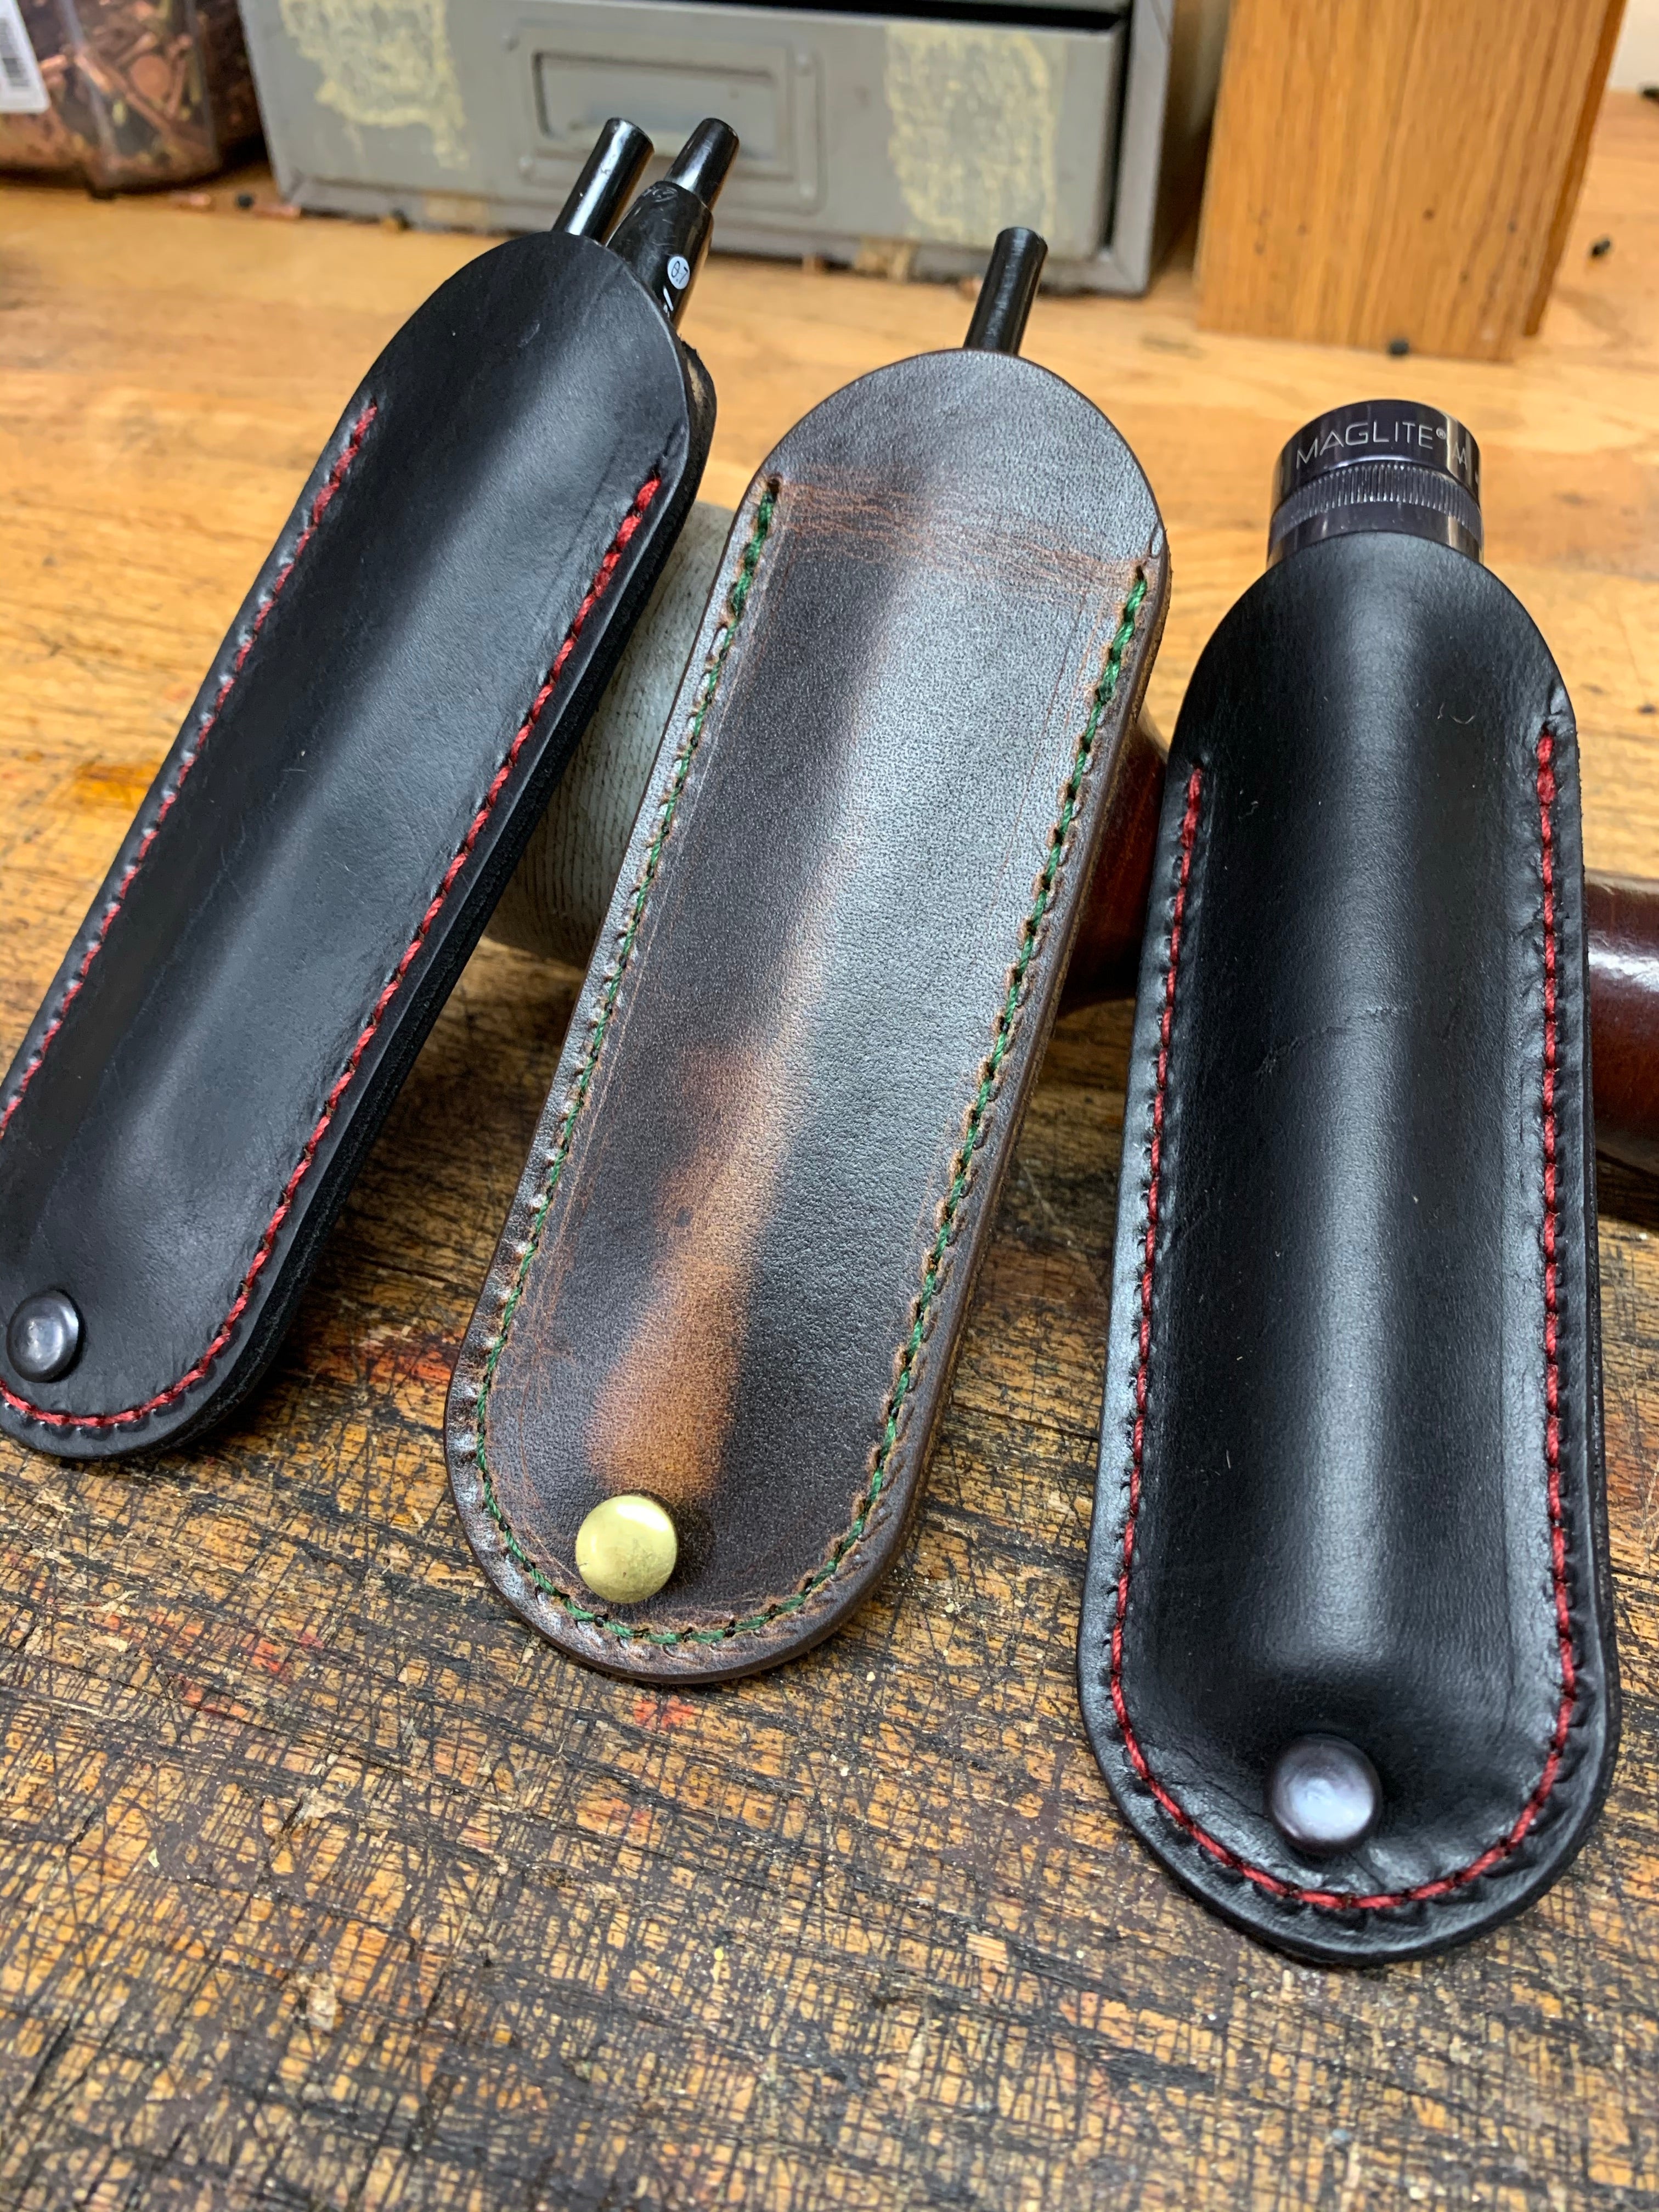 Removable Pen Sleeve / Light Sleeve for Radio Straps - F.D. Leatherworks